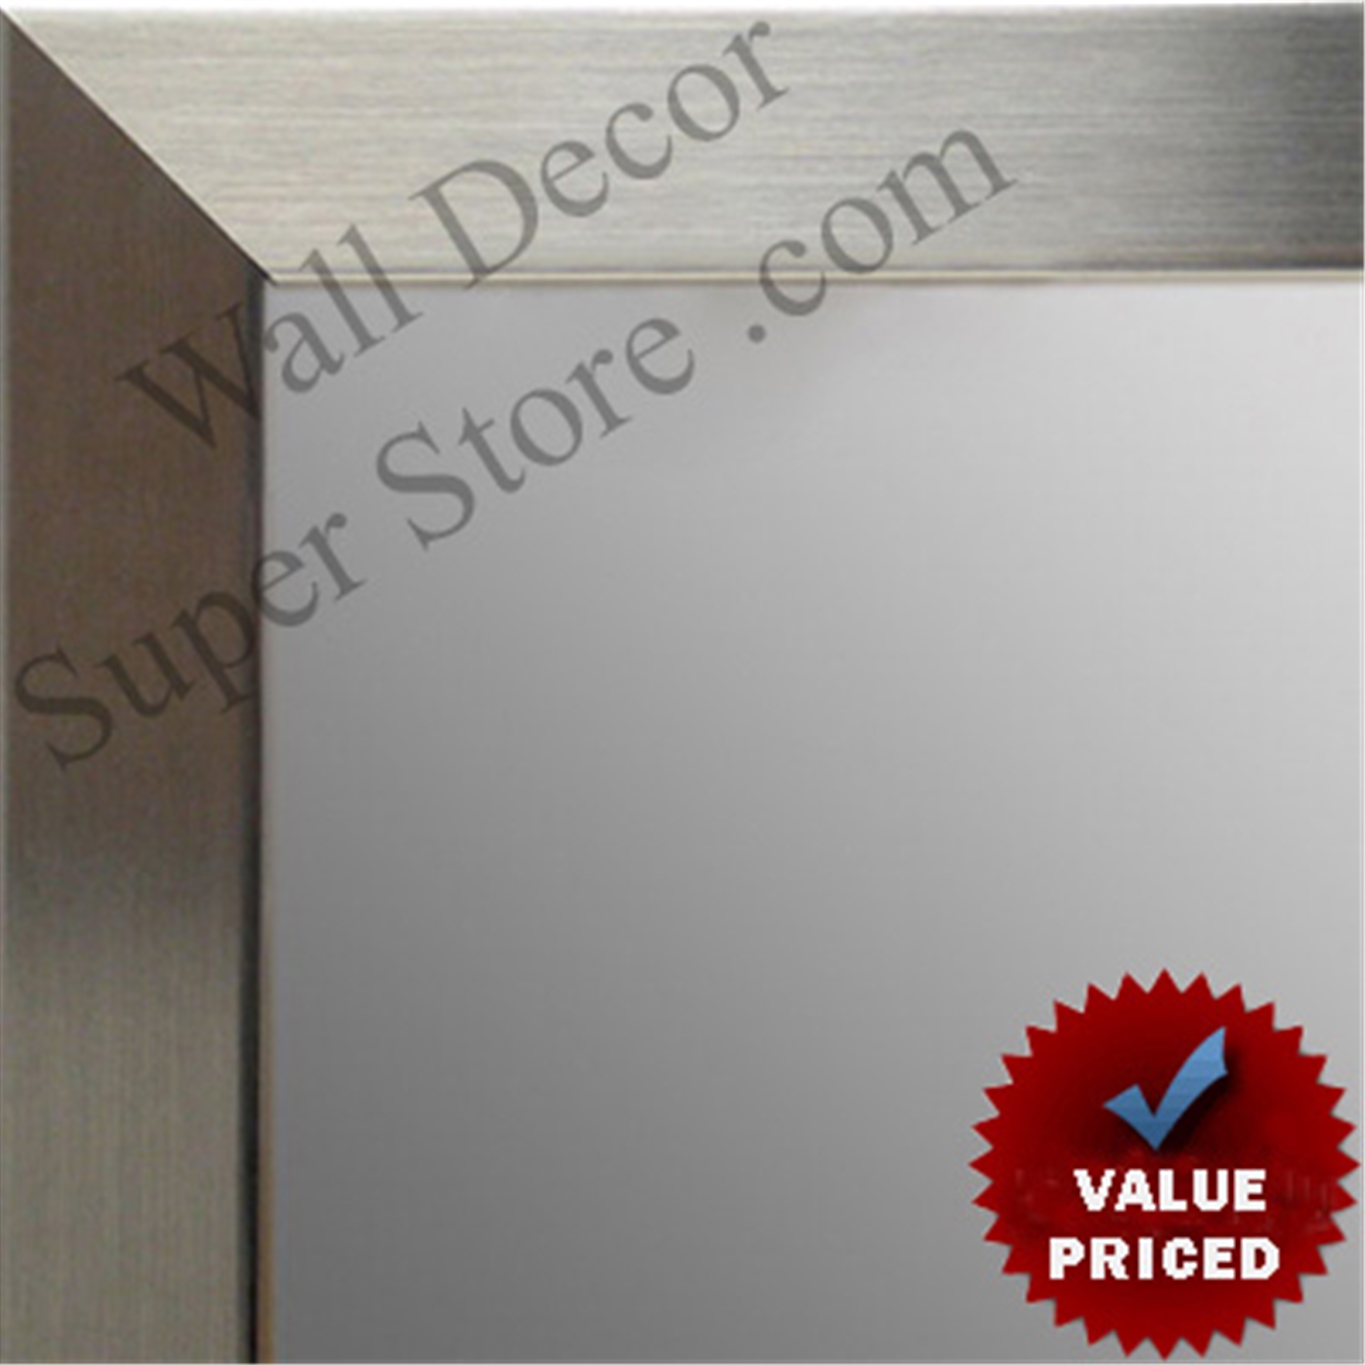 MR1708-1 | Stainless Steel Look - Mica Finish - Moulding | Custom Wall Mirror | Decorative Framed Mirrors | Wall D�cor